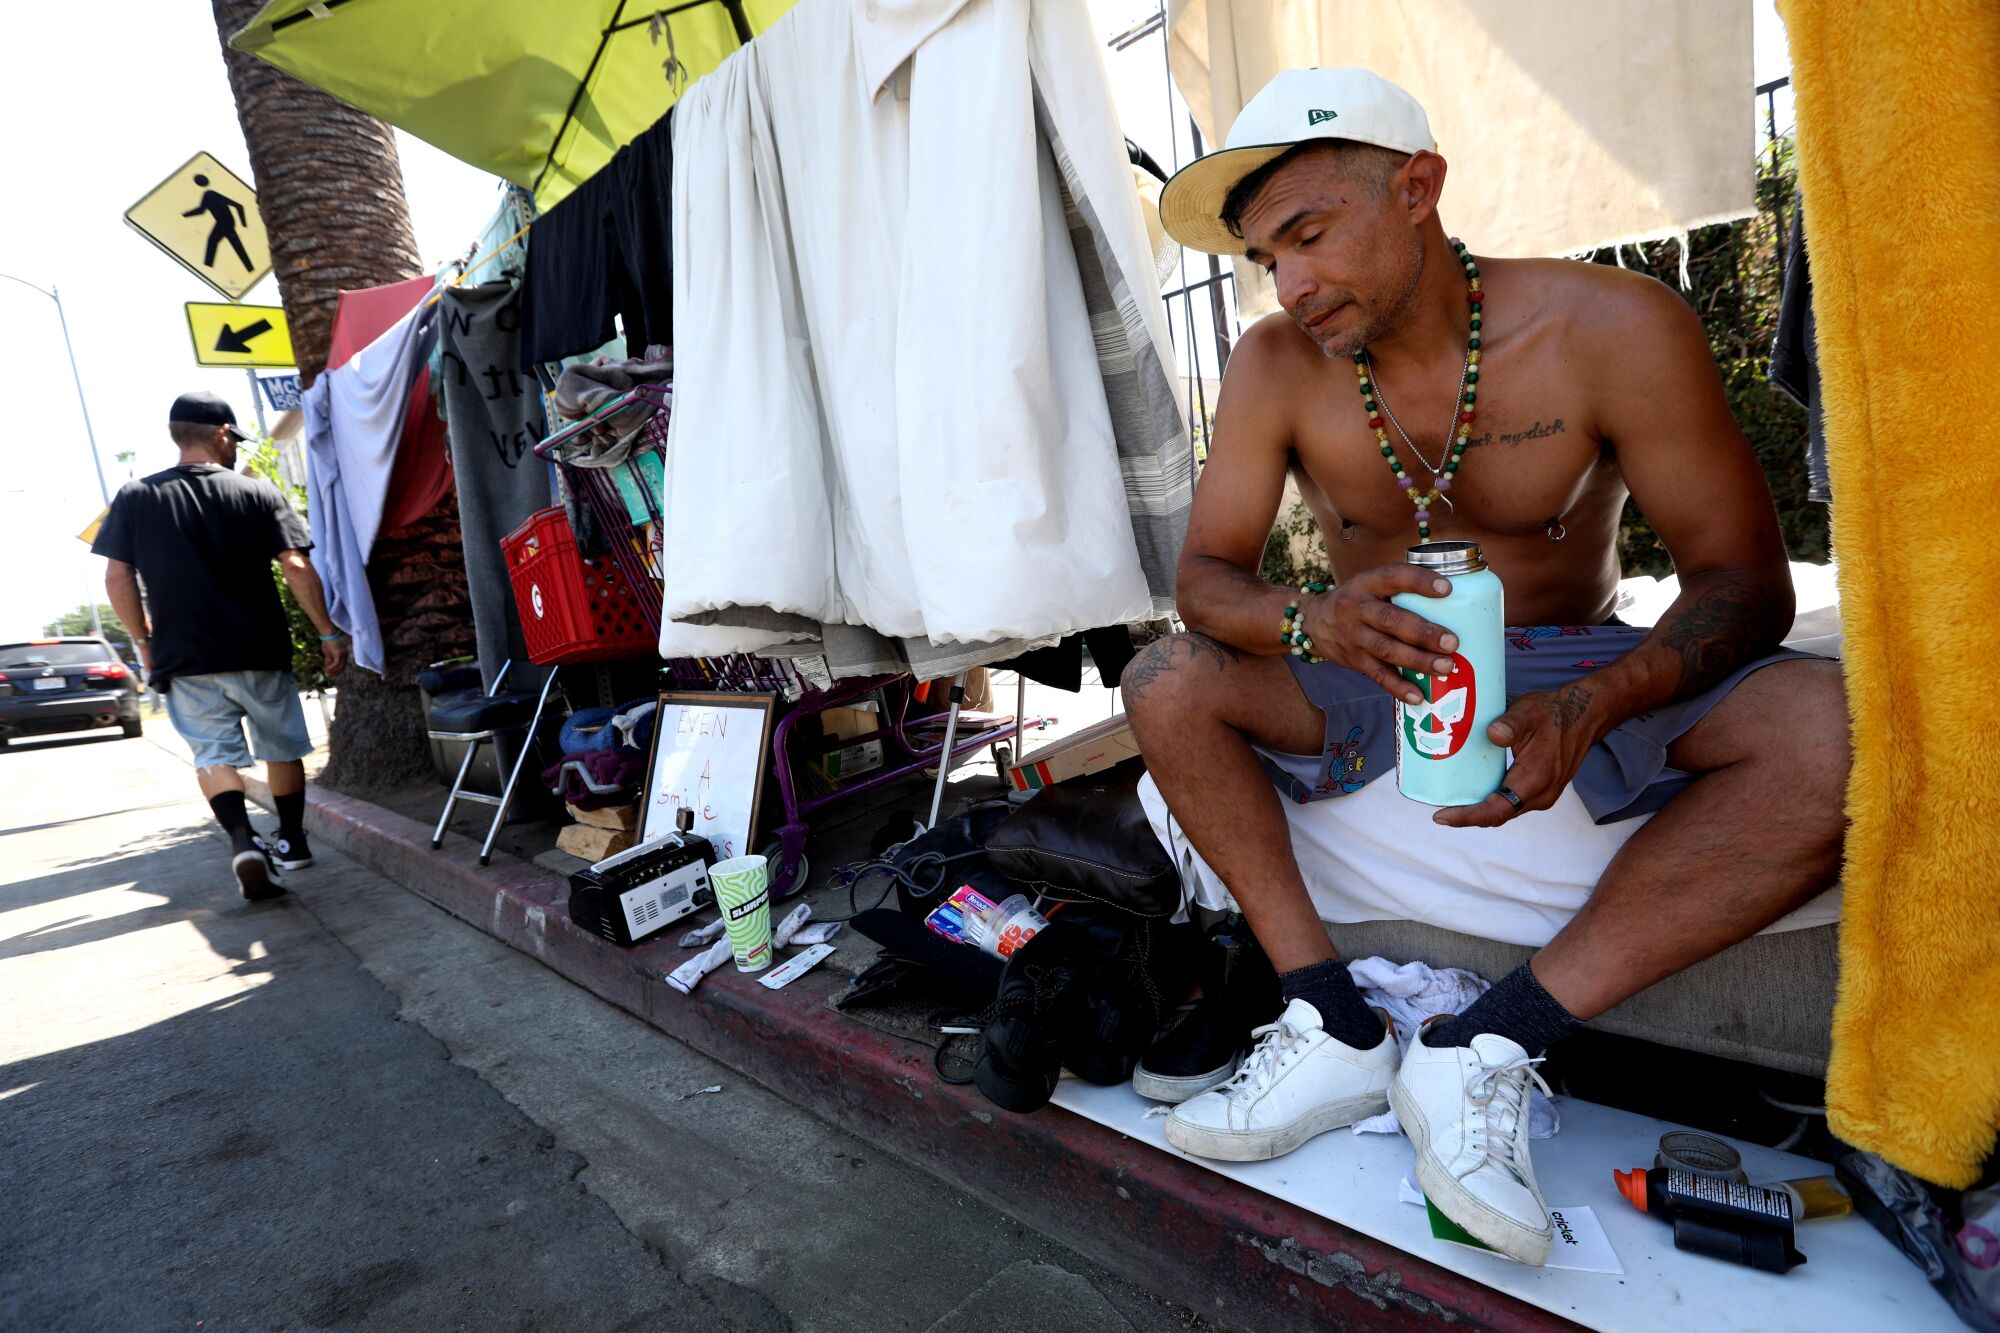 A man tries to stay cool in his homeless encampment during a heat wave in Hollywood